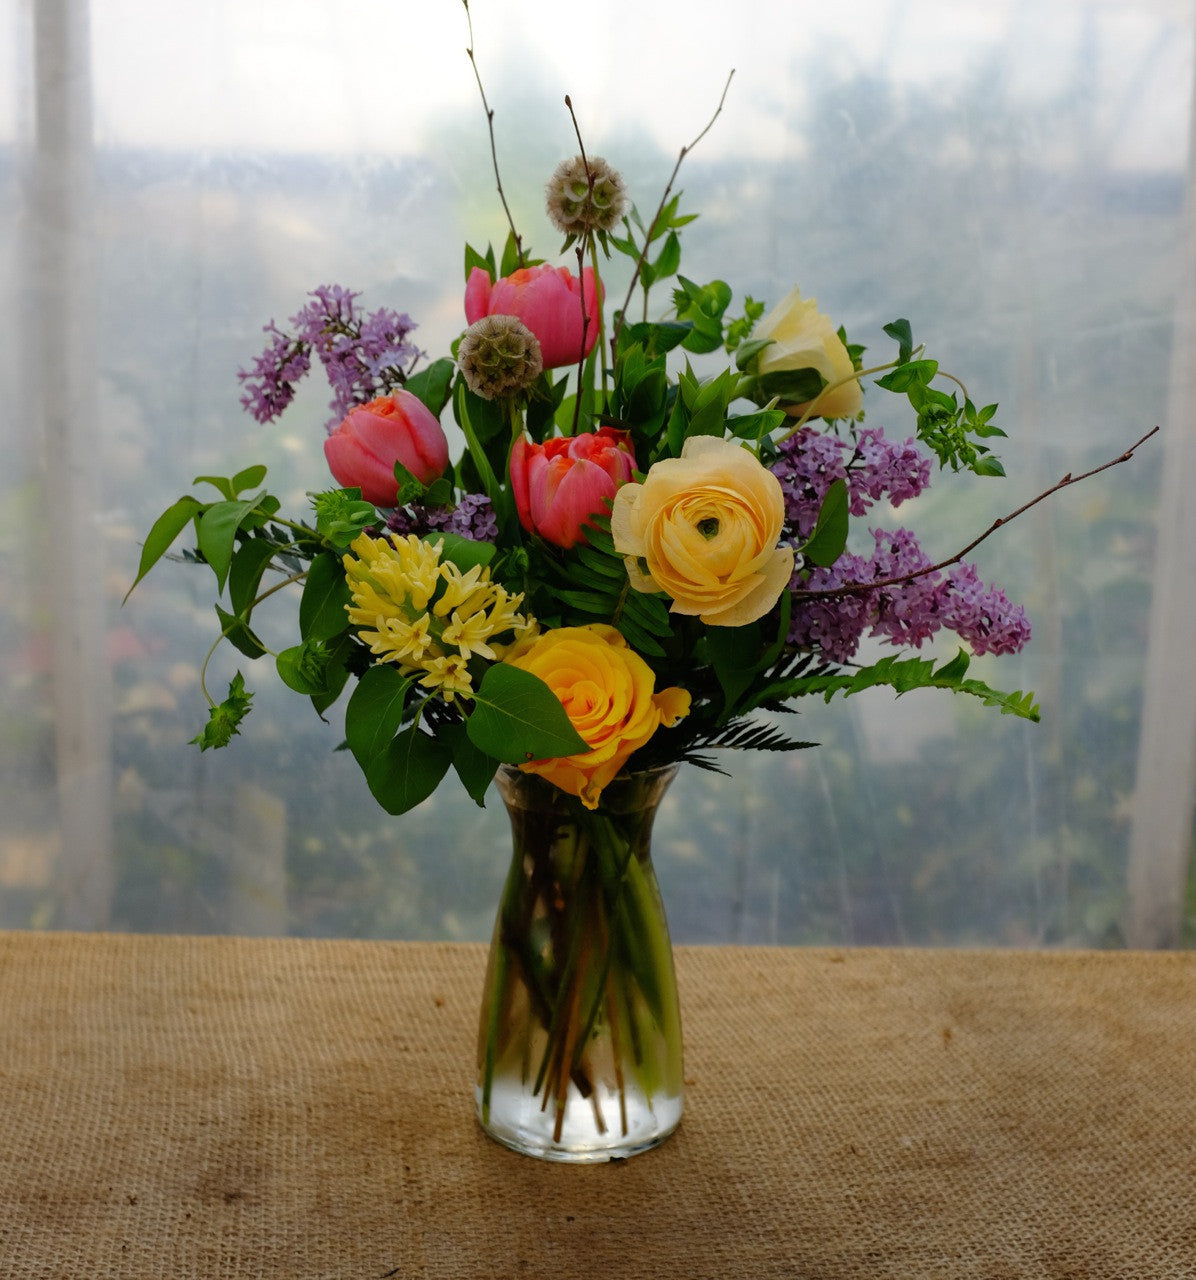 Somerset Flower Bouquet: Pink Tulips, Yellow Ranunculus, Scabiosa Pods and Lilac Flowers.  Designed in Lexington, KY by Michler's Florist